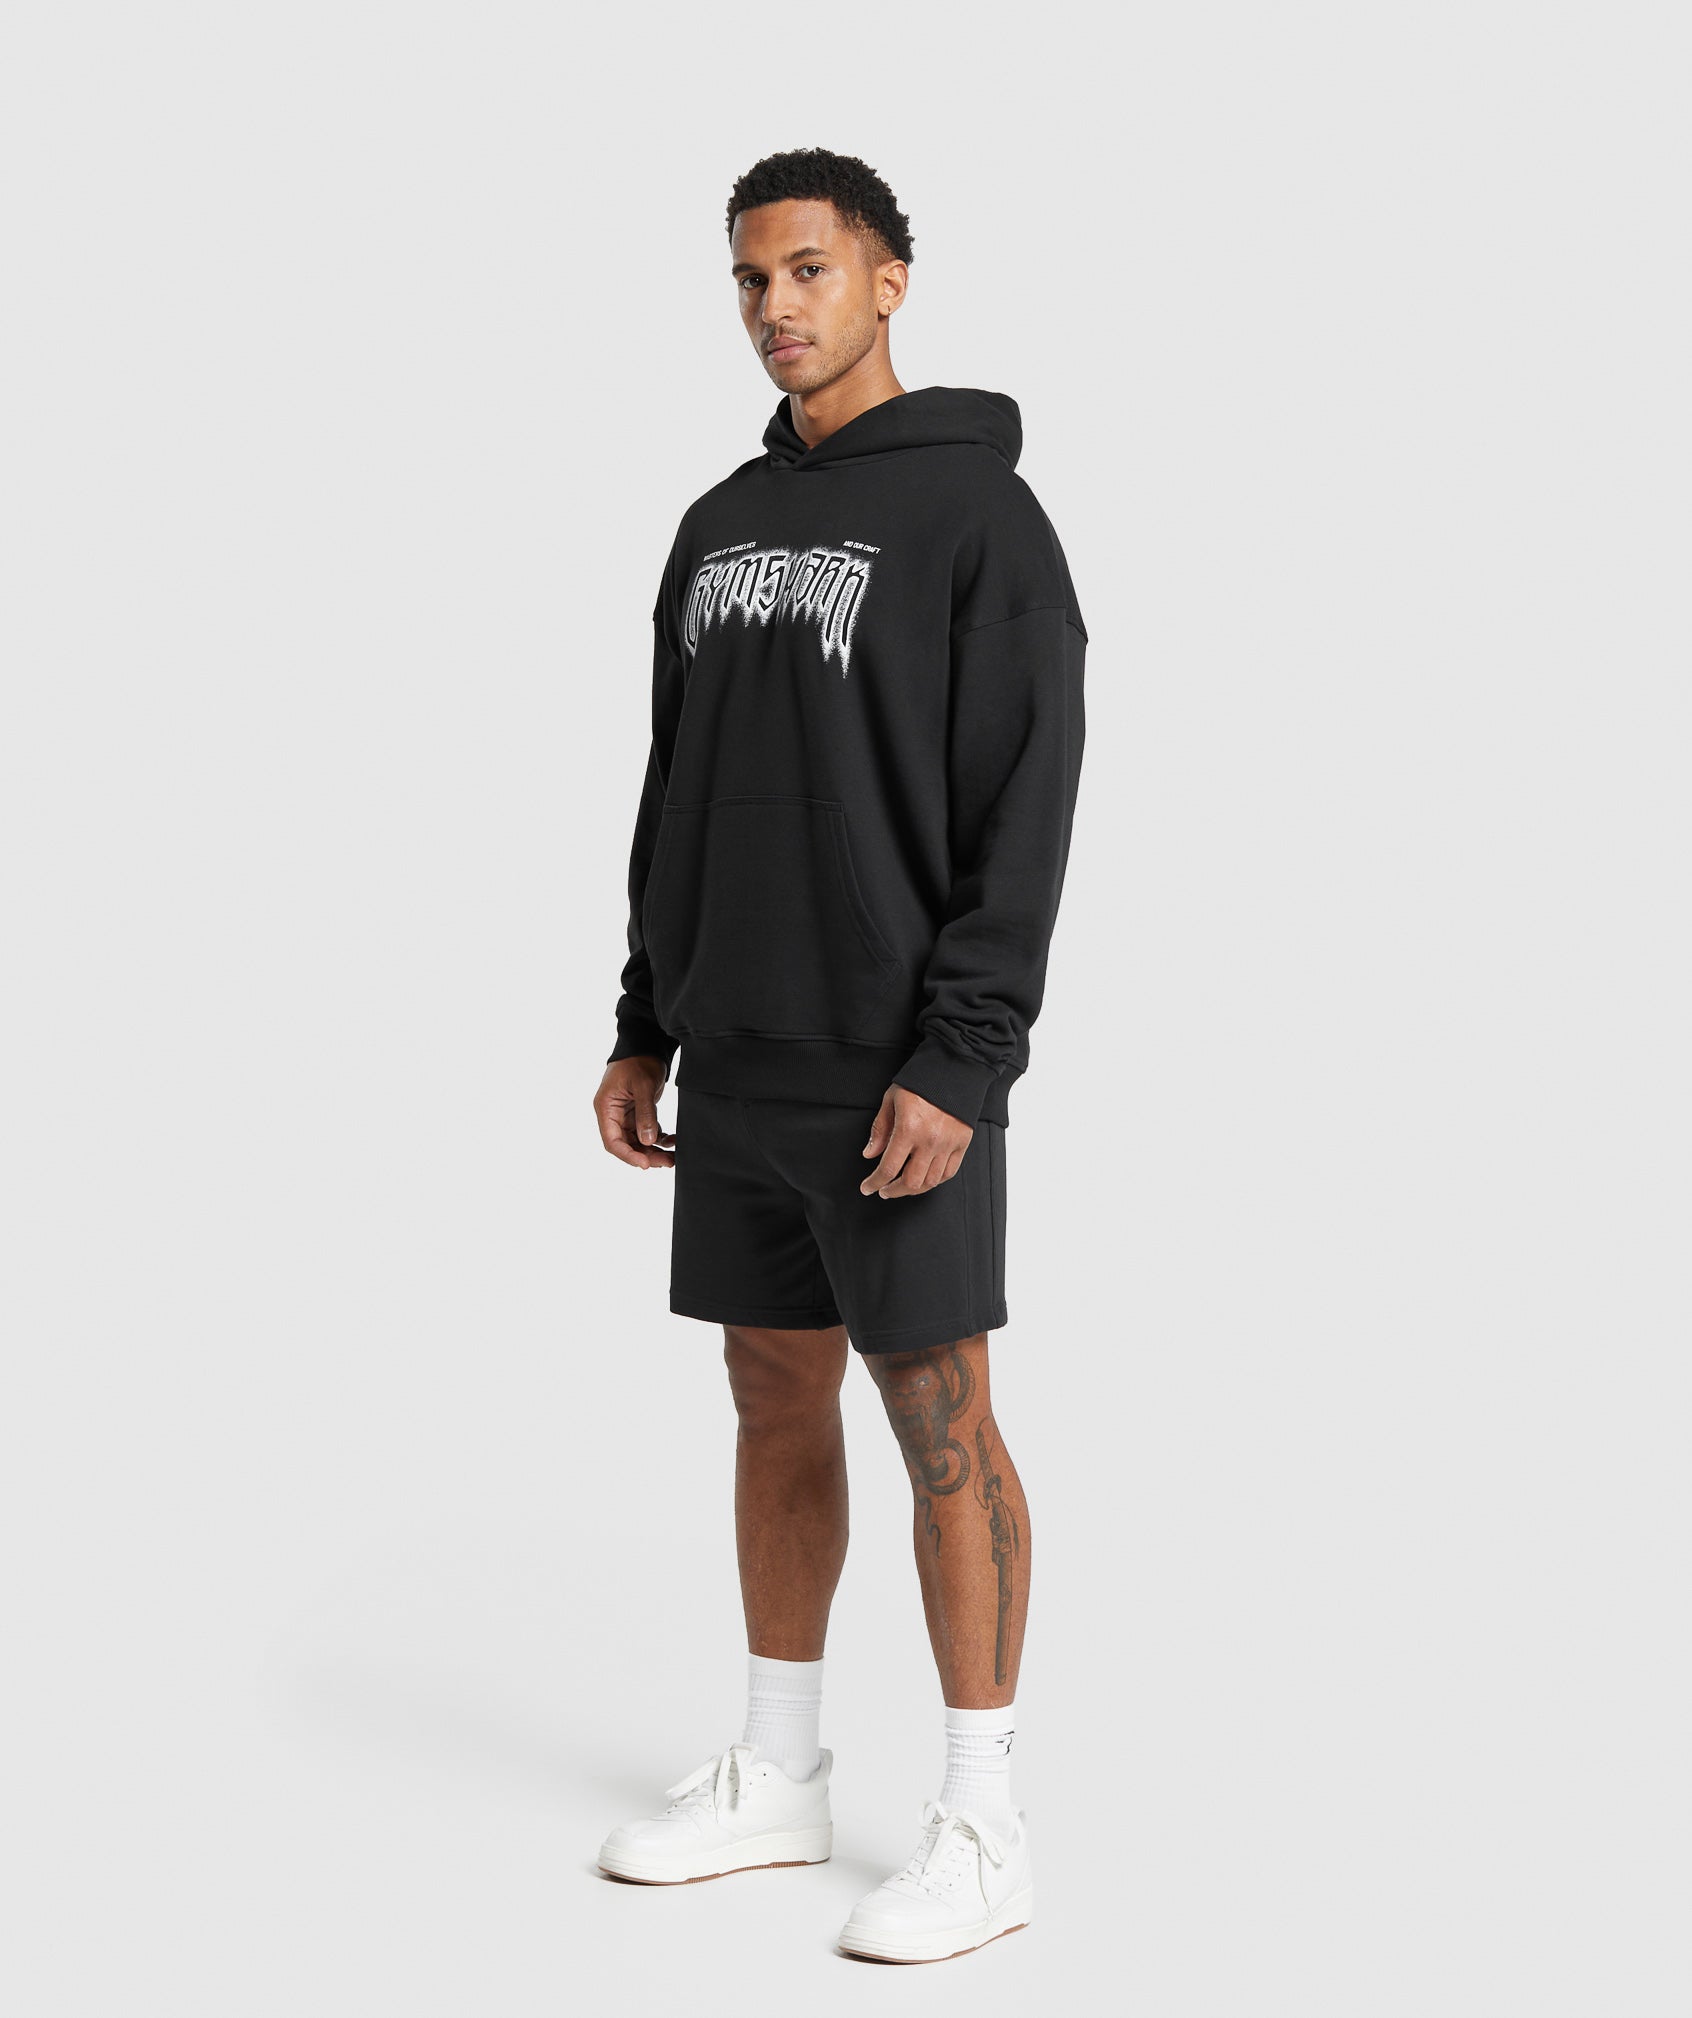 Masters of Our Craft Hoodie in Black - view 4